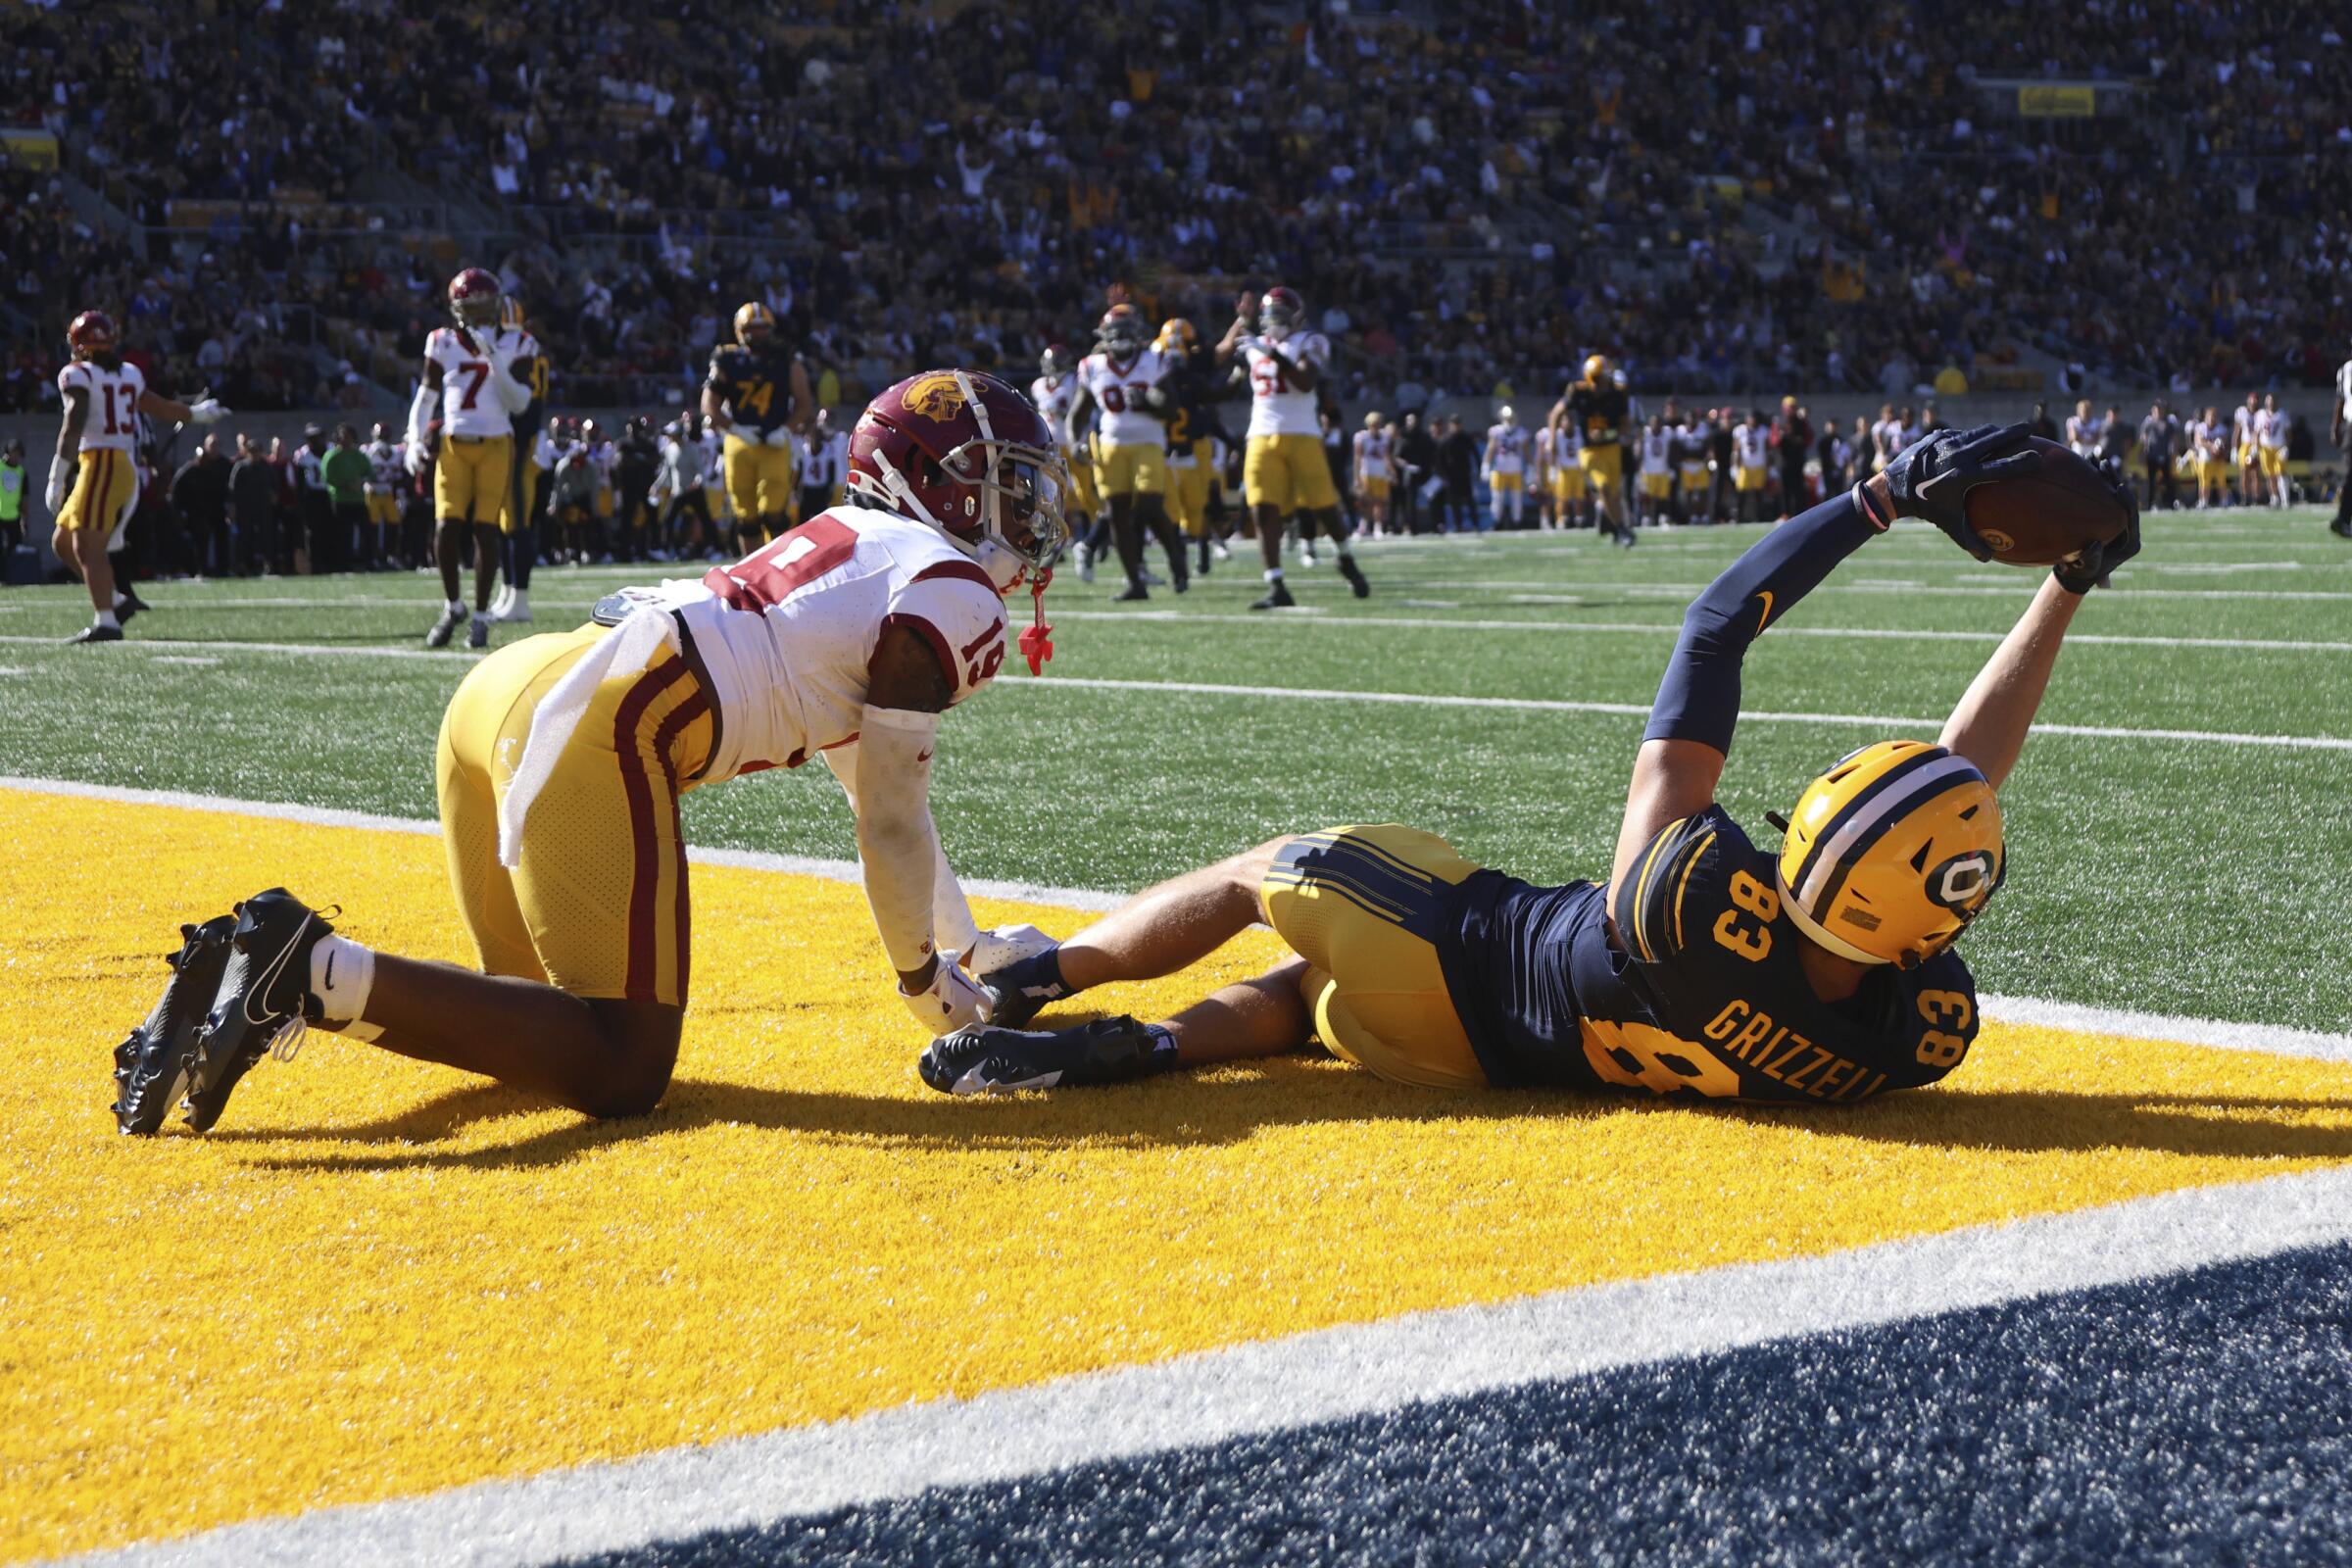 Cal wide receiver Trond Grizzell, right, celebrates after scoring a touchdown over USC safety Jaylin Smith.